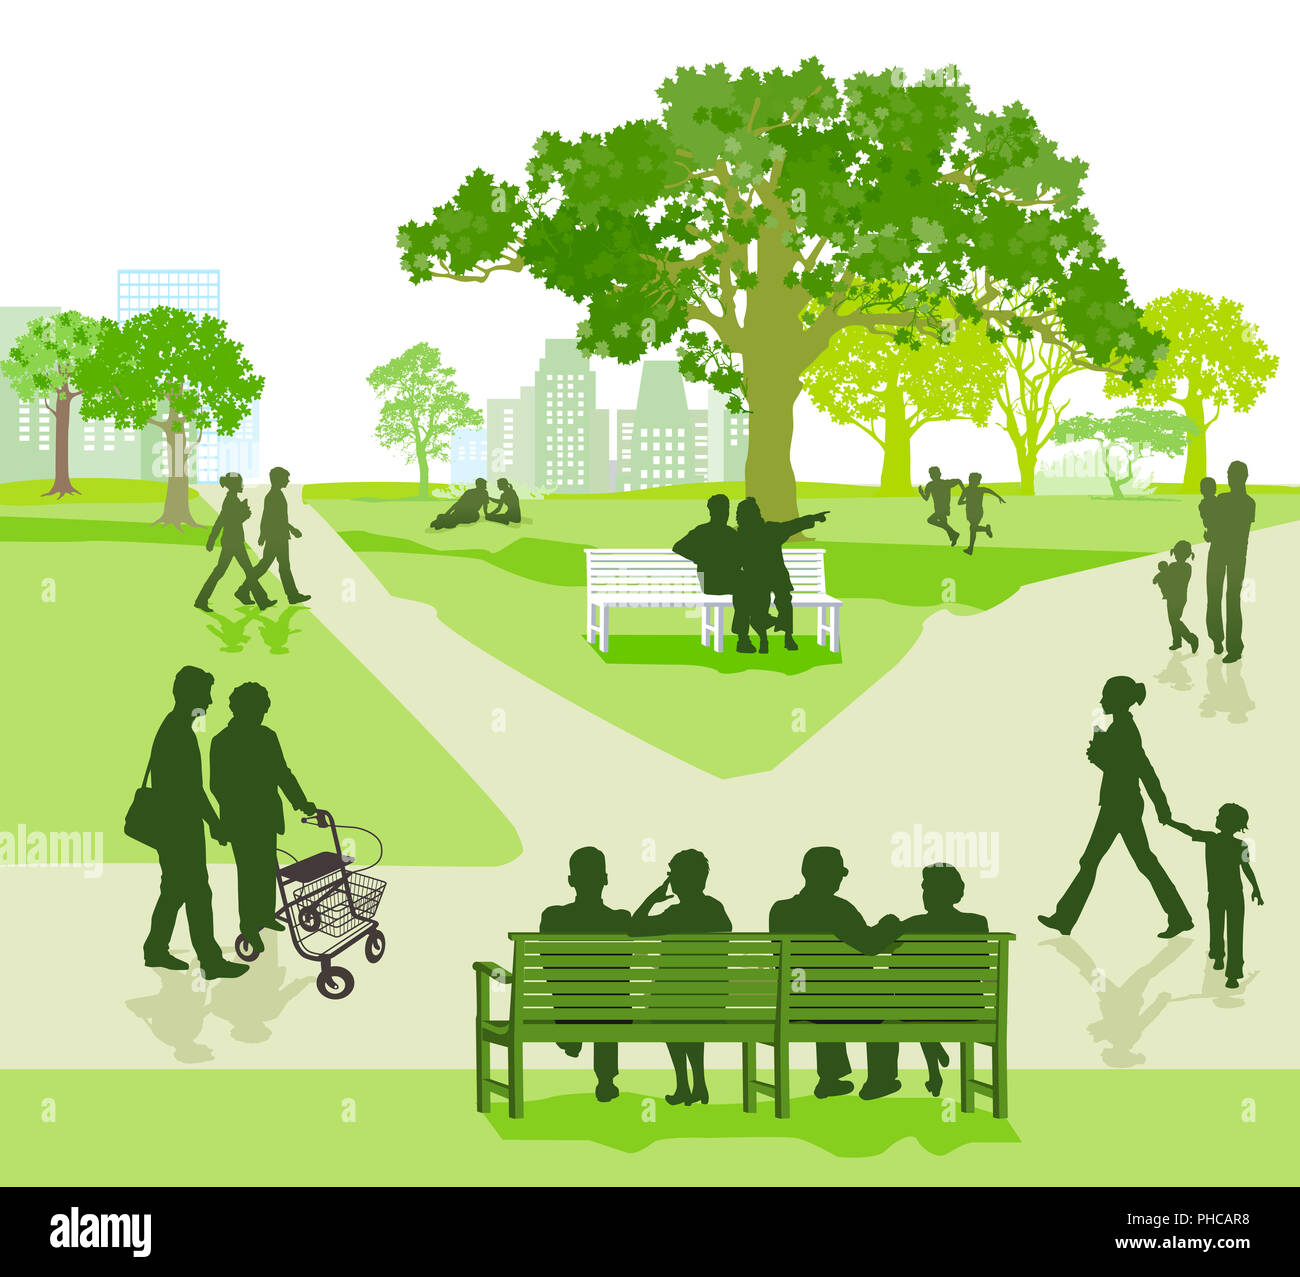 Generation together in the park, illustration Stock Photo